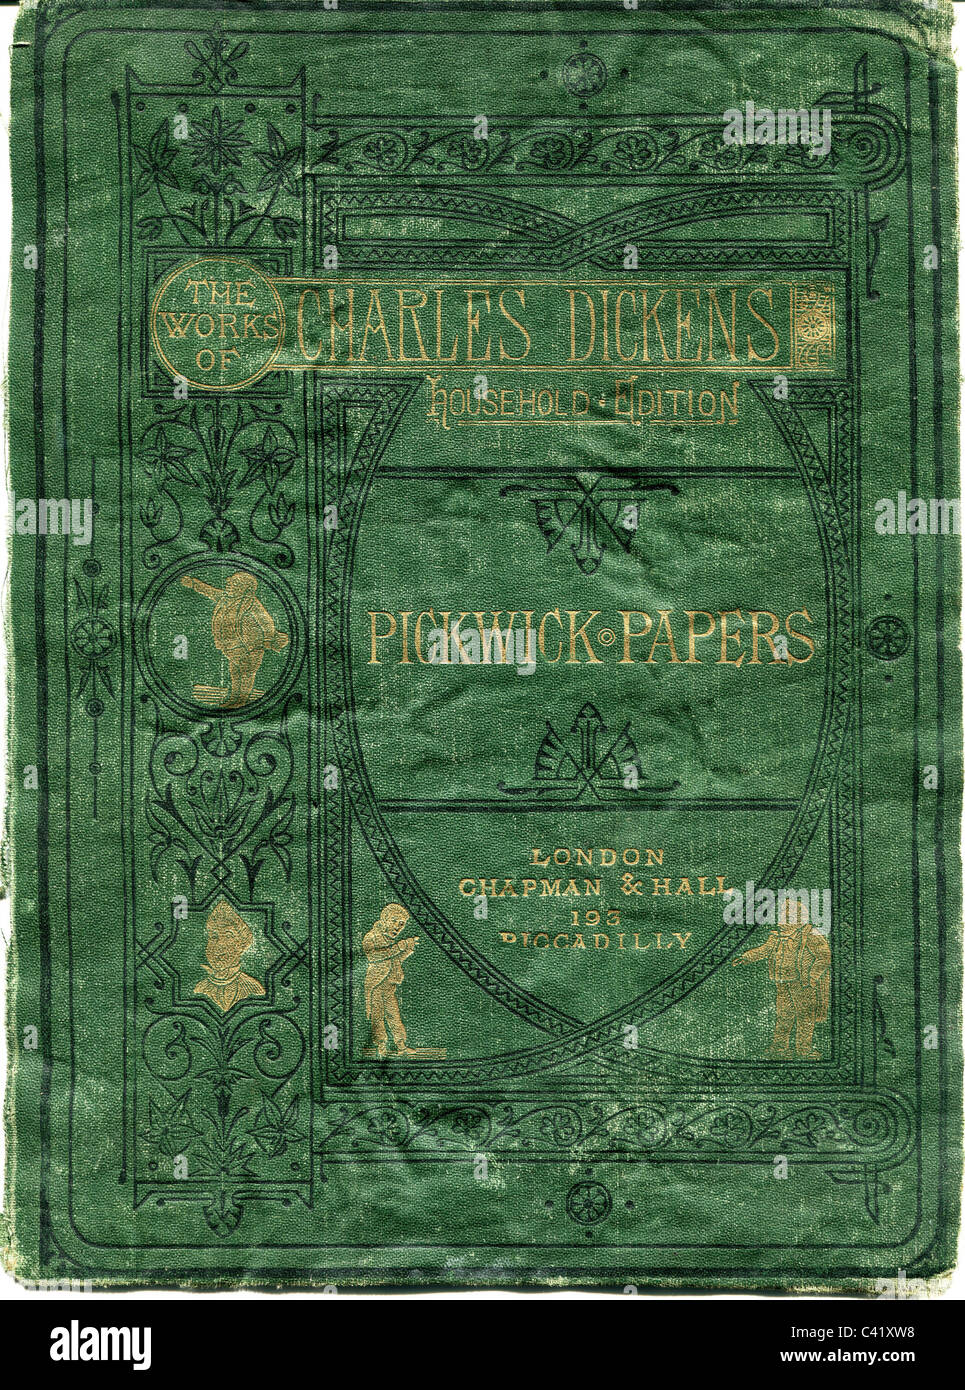 Dickens, Charles, 7.2.1812 - 9.7.1870, autor/escritor inglés, obras, 'The Pickwick Papers', Household Edition, Chapman and Hall, Londres, 1871 - 1880, cover, Foto de stock